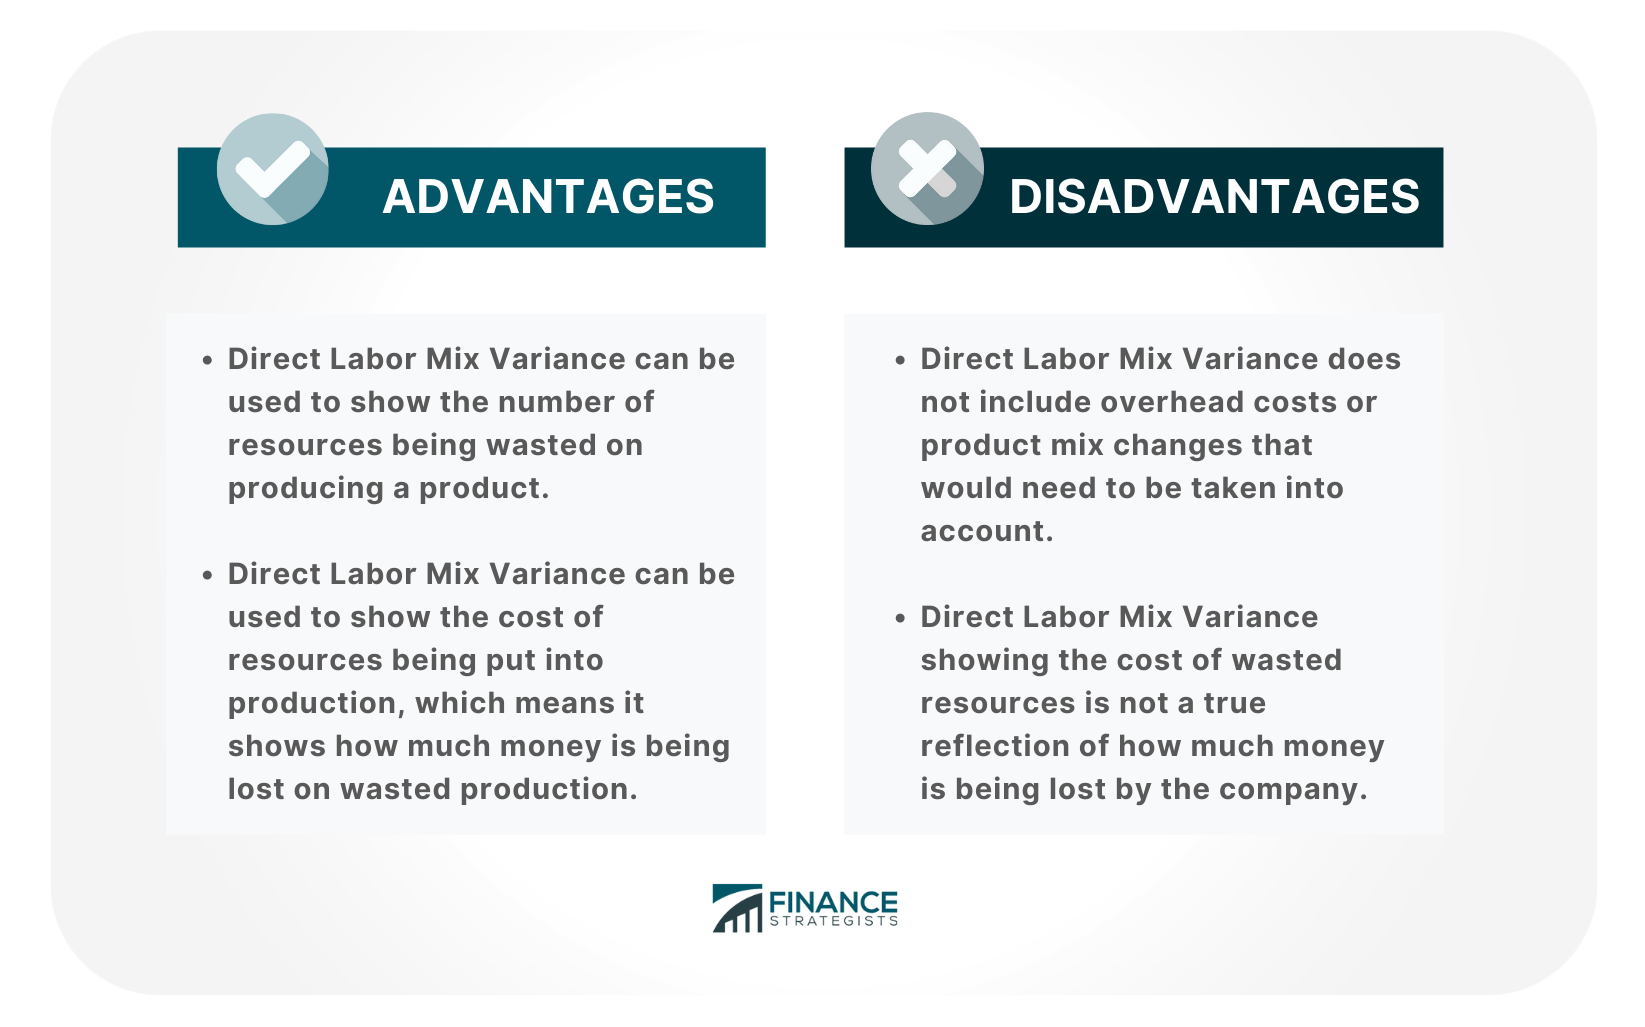 Advantages and Disadvantages of Direct Labor Mix Variance